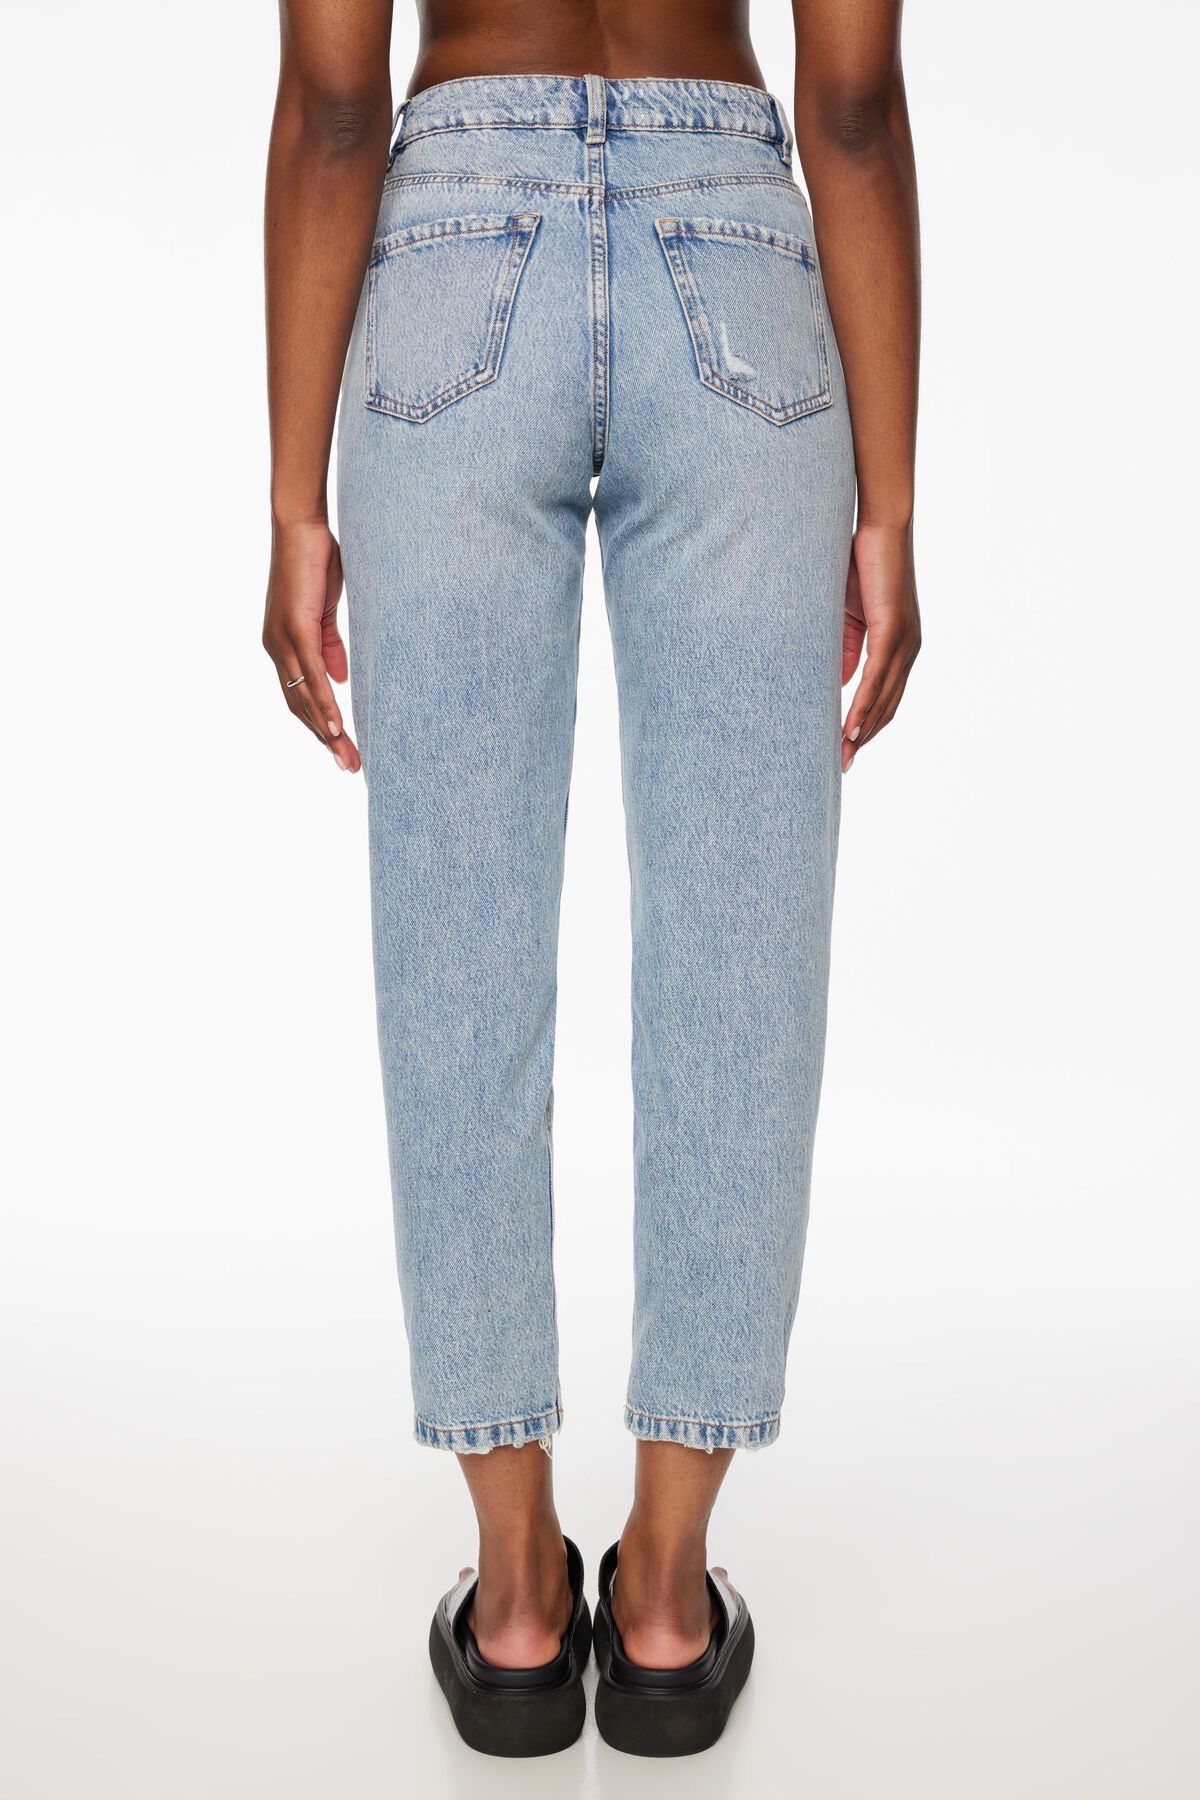 Dynamite Claudia Ultra High Waisted Jeans. 3